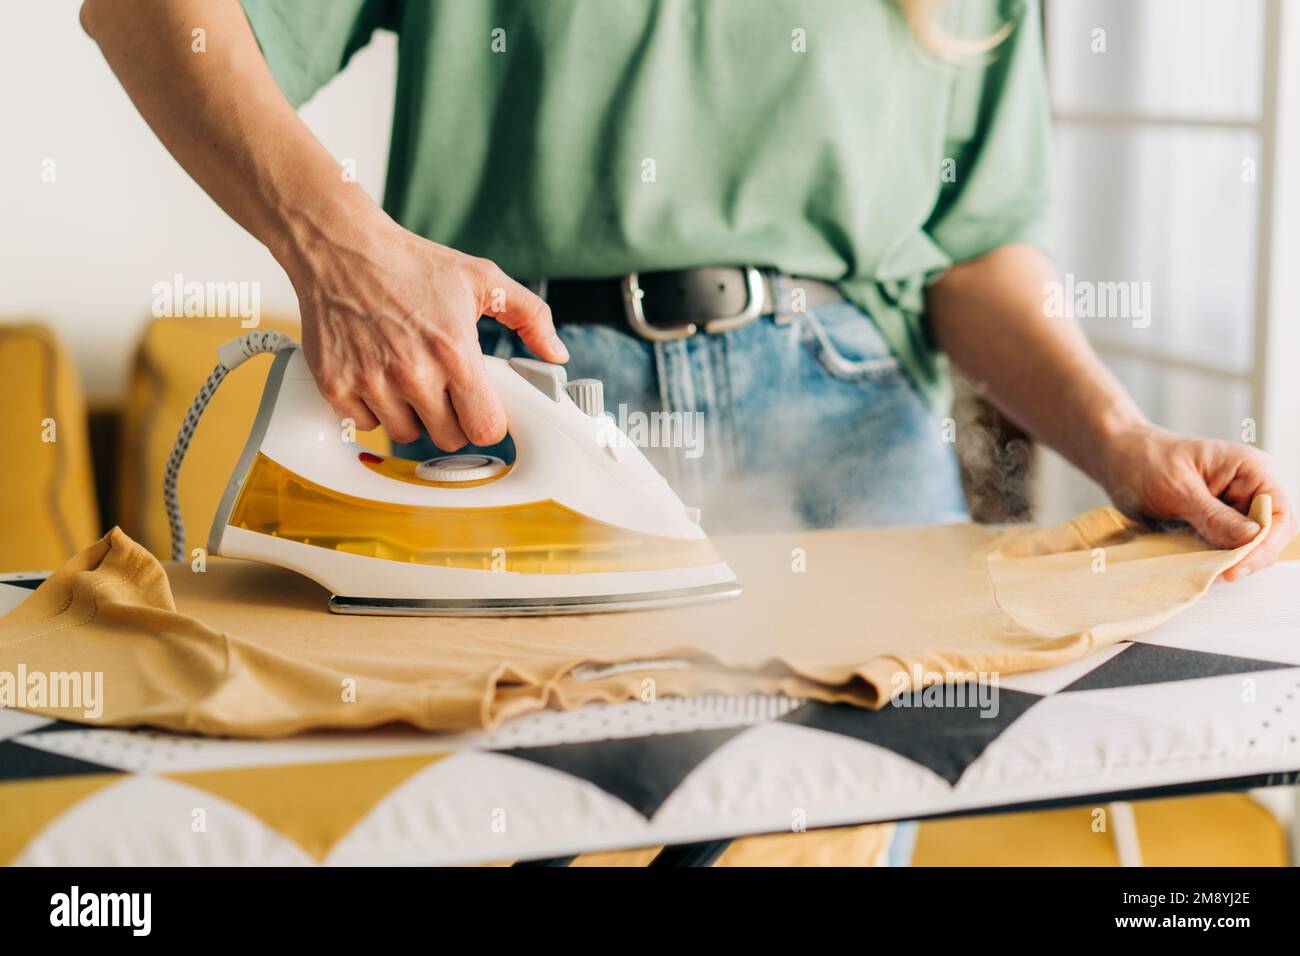 Close Woman's Hand Ironing Cloth Ironing Board Stock Photo by ©AndreyPopov  190334872